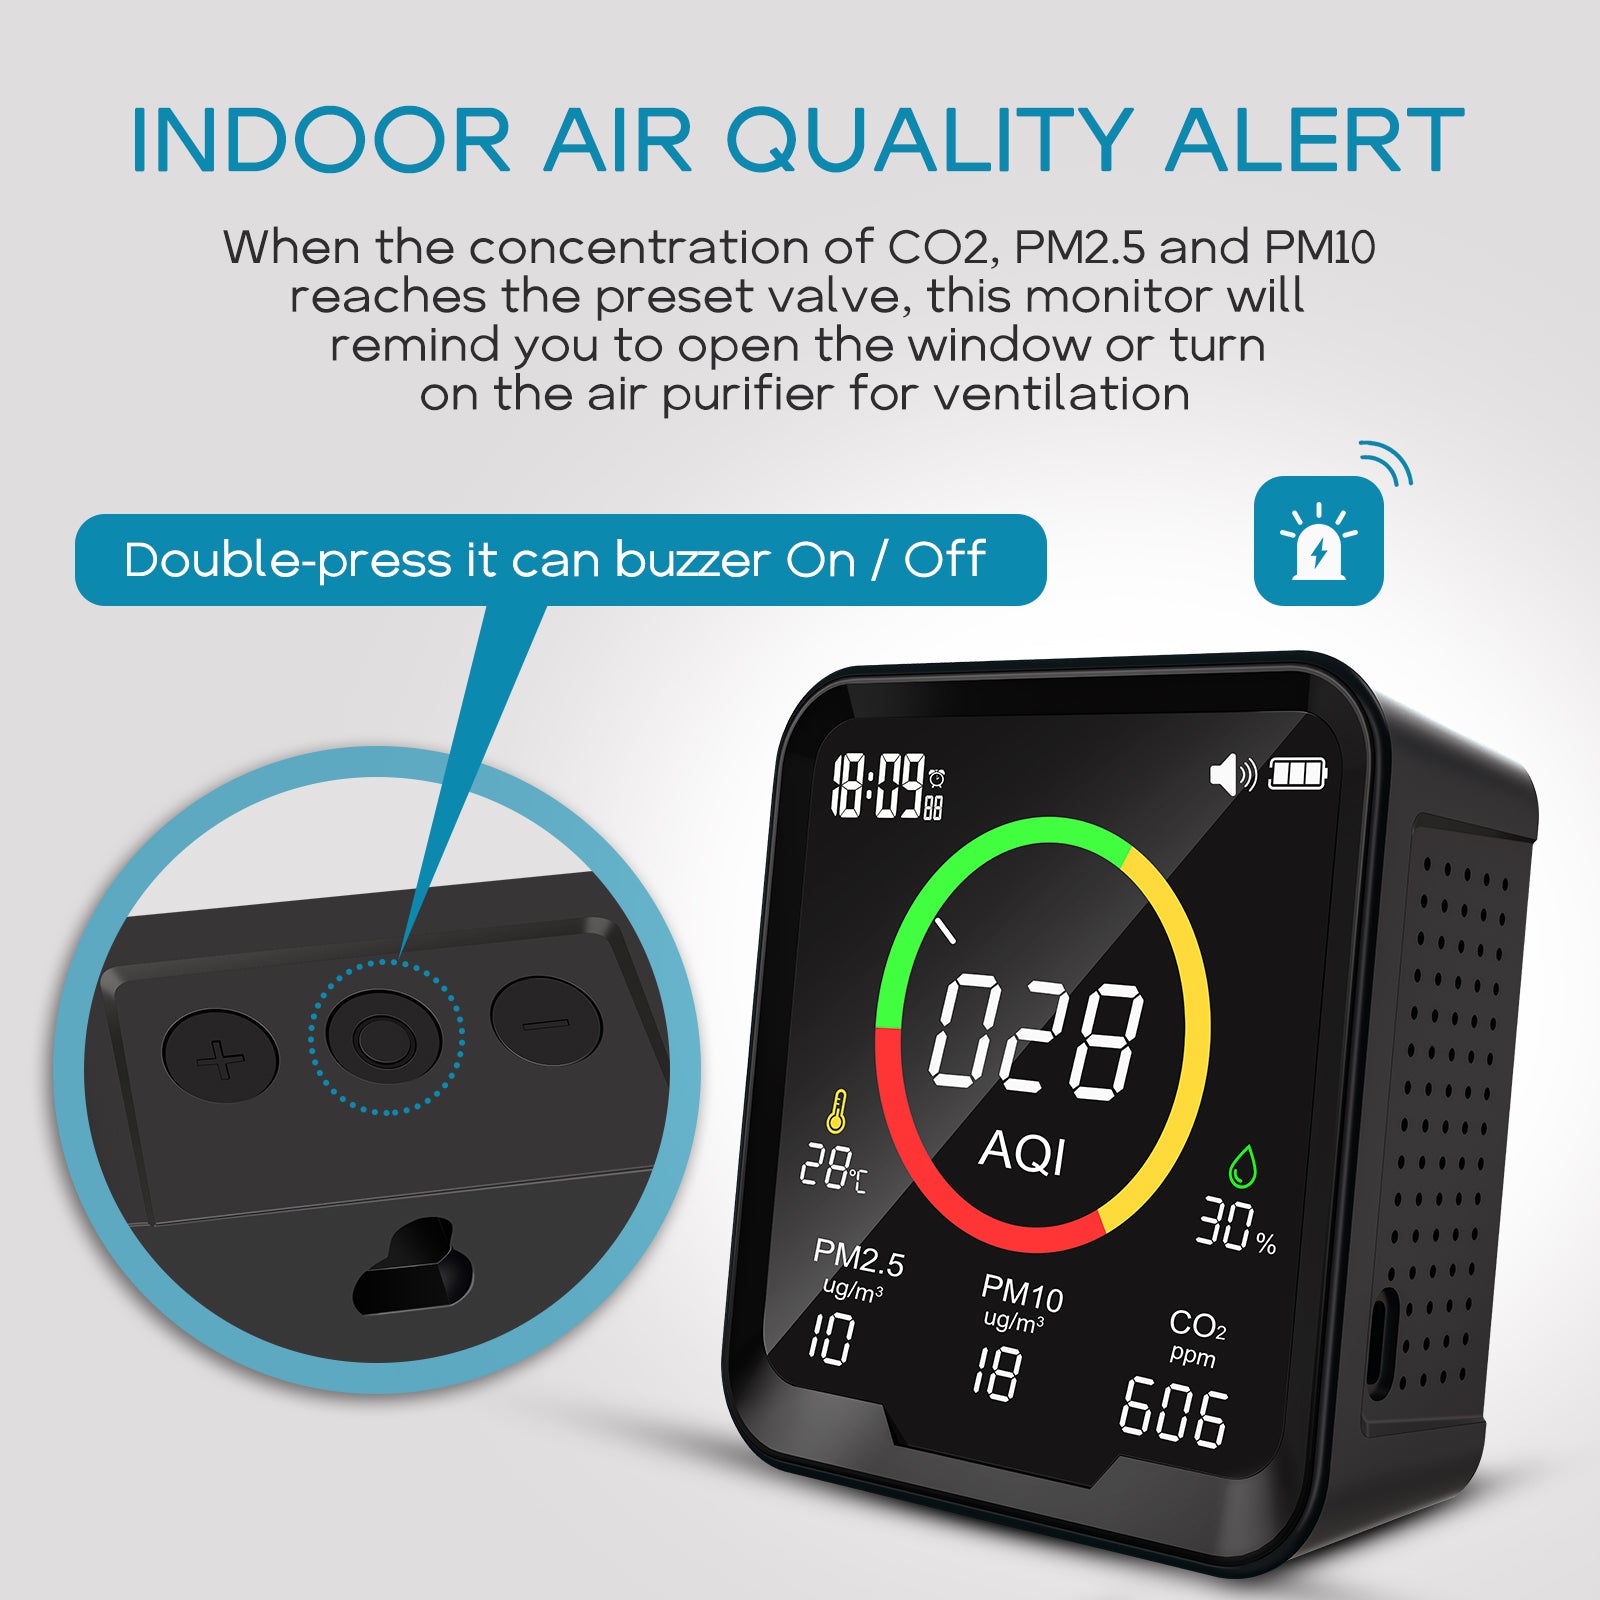 Carefor CF-9A Portable Air Quality Monitor For AQI, PM2.5, PM10, CO2, Temp  and Humidity,With Buzzer Alarm